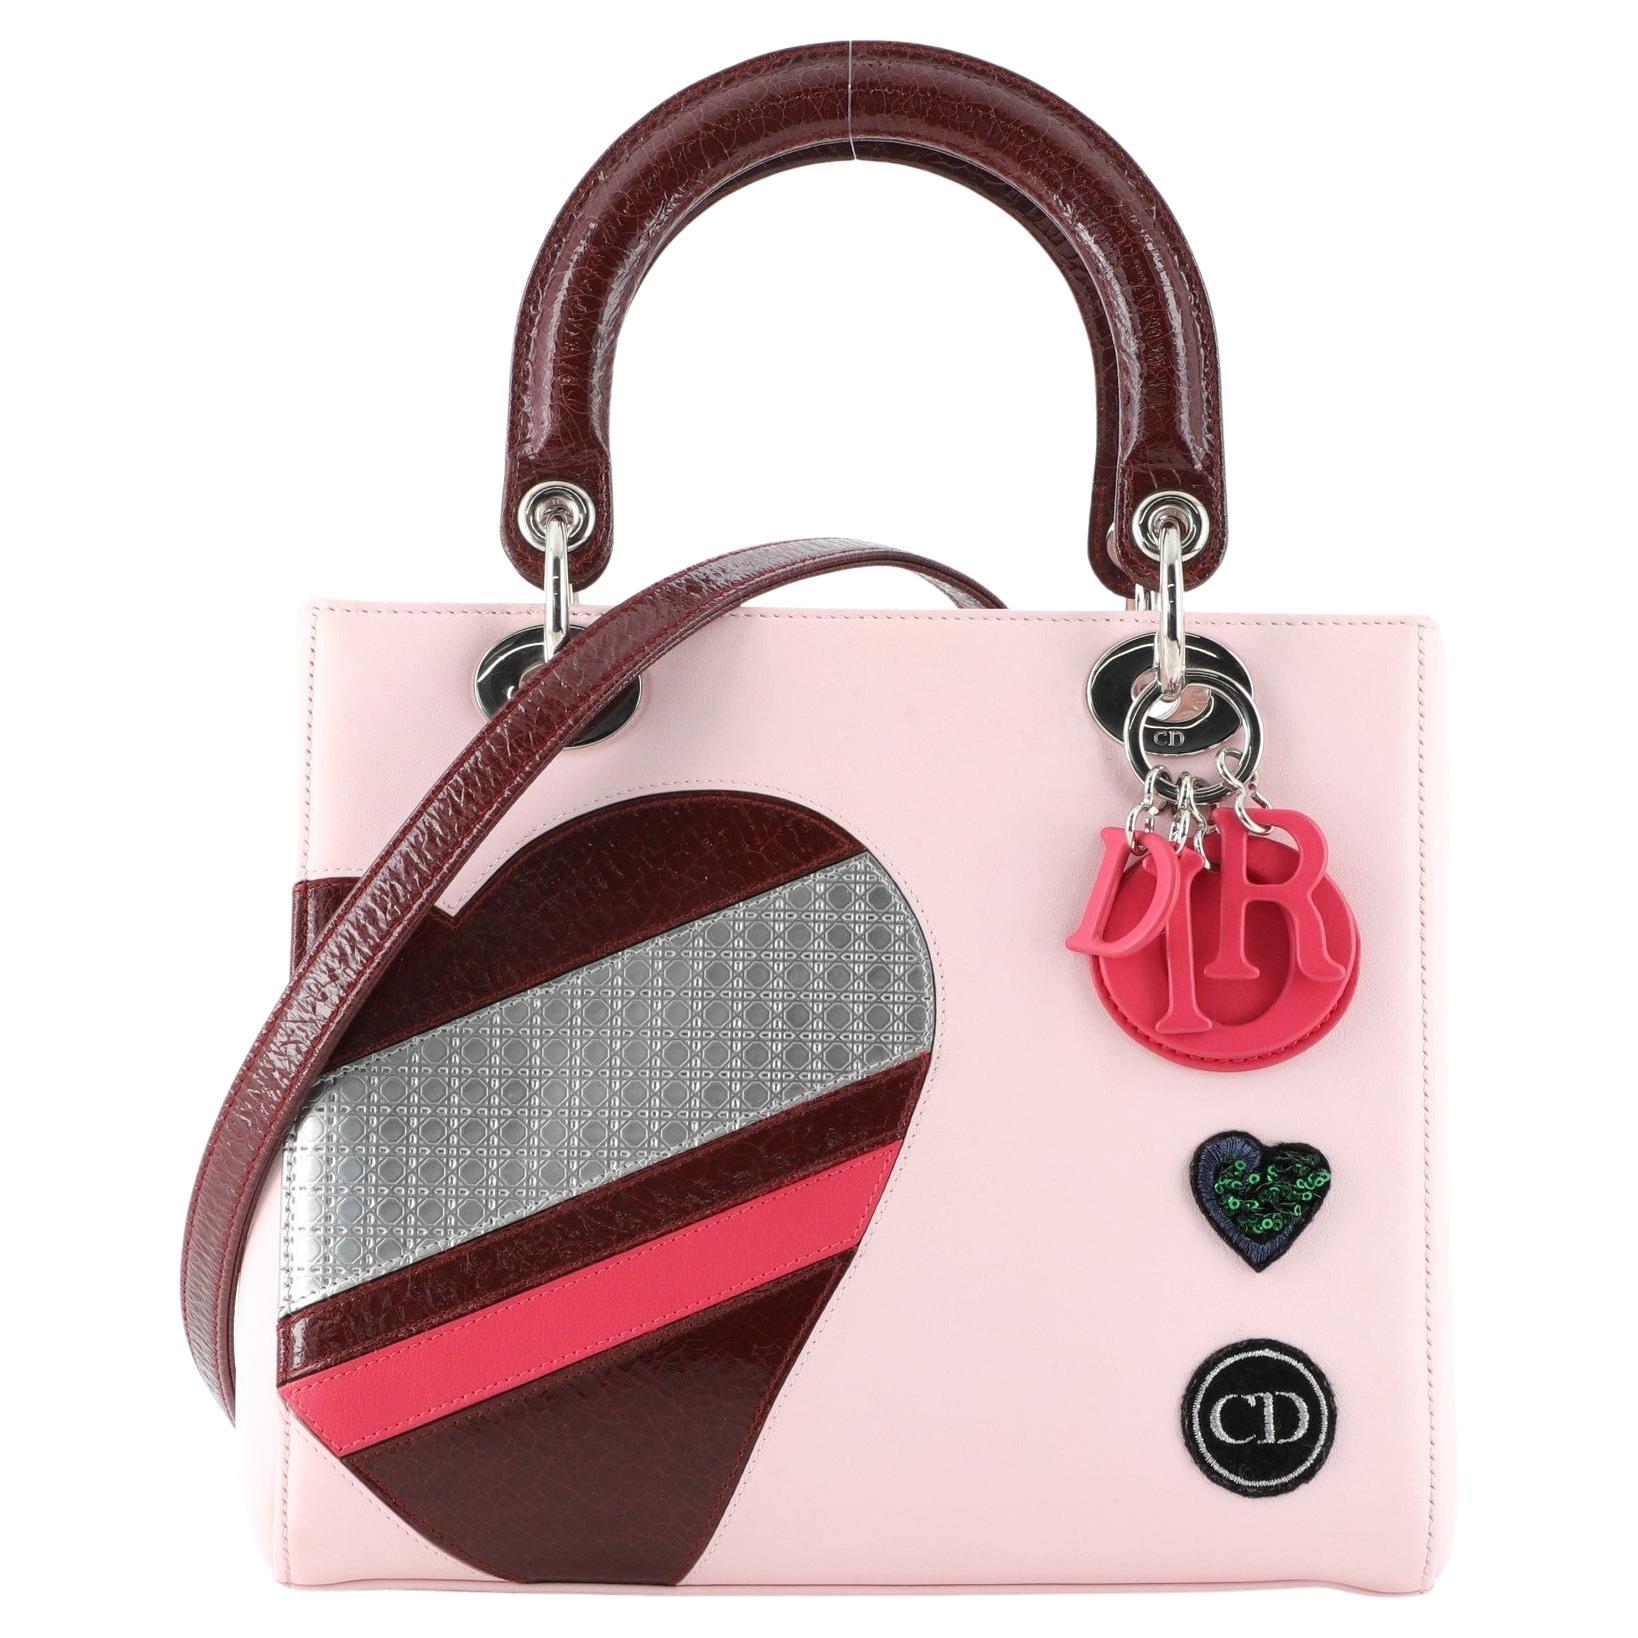 Christian Dior Valentine's Day Heart Lady Dior Bag Leather with Textured Patent